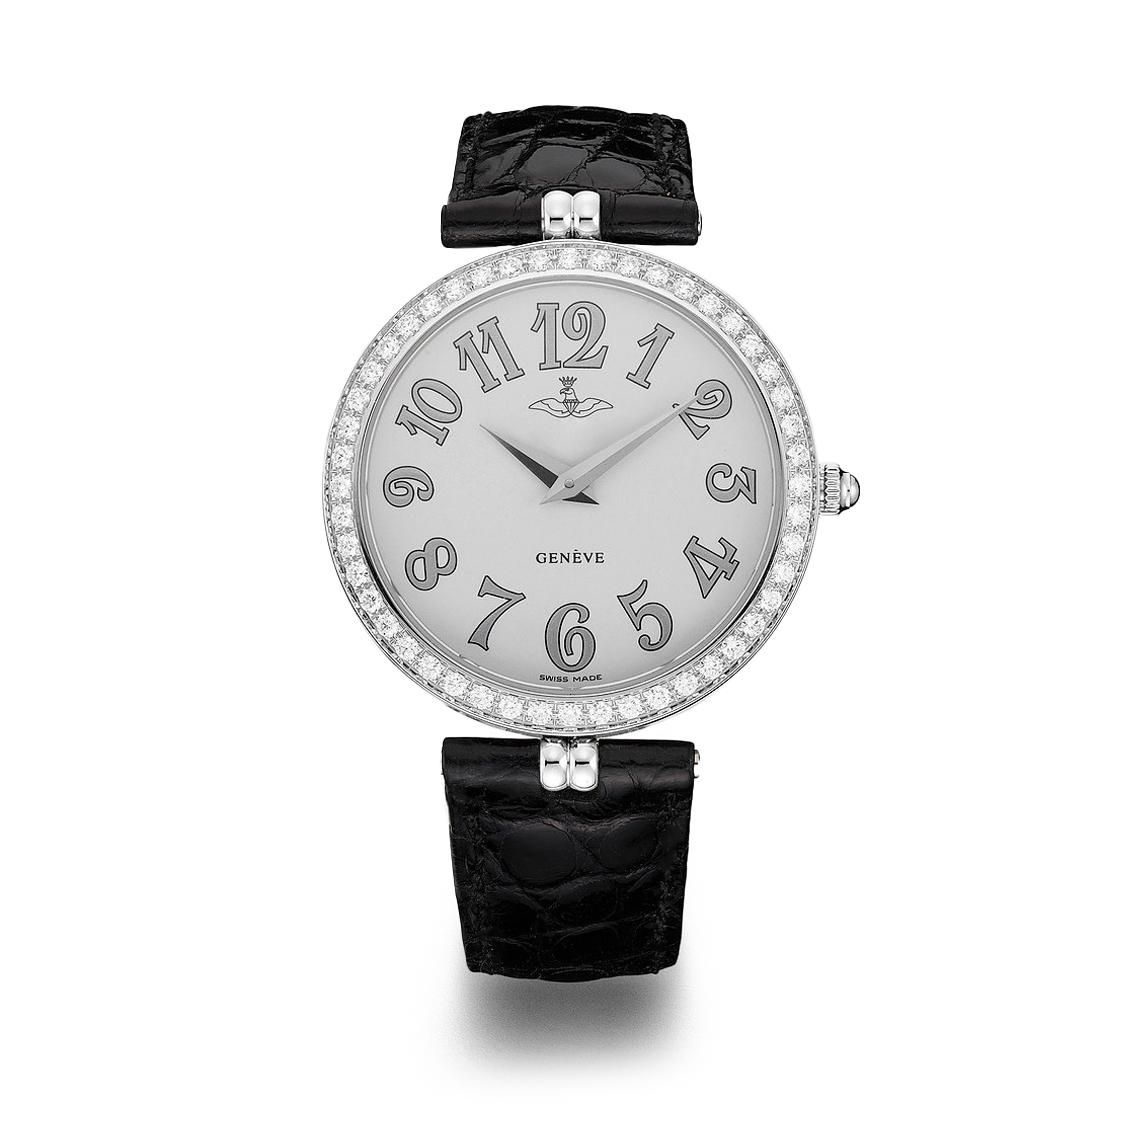 Watch in steel, blanc dial, bezel set with 48 diamonds 0.89 cts with prong buckle alligator strap quartz movement.        